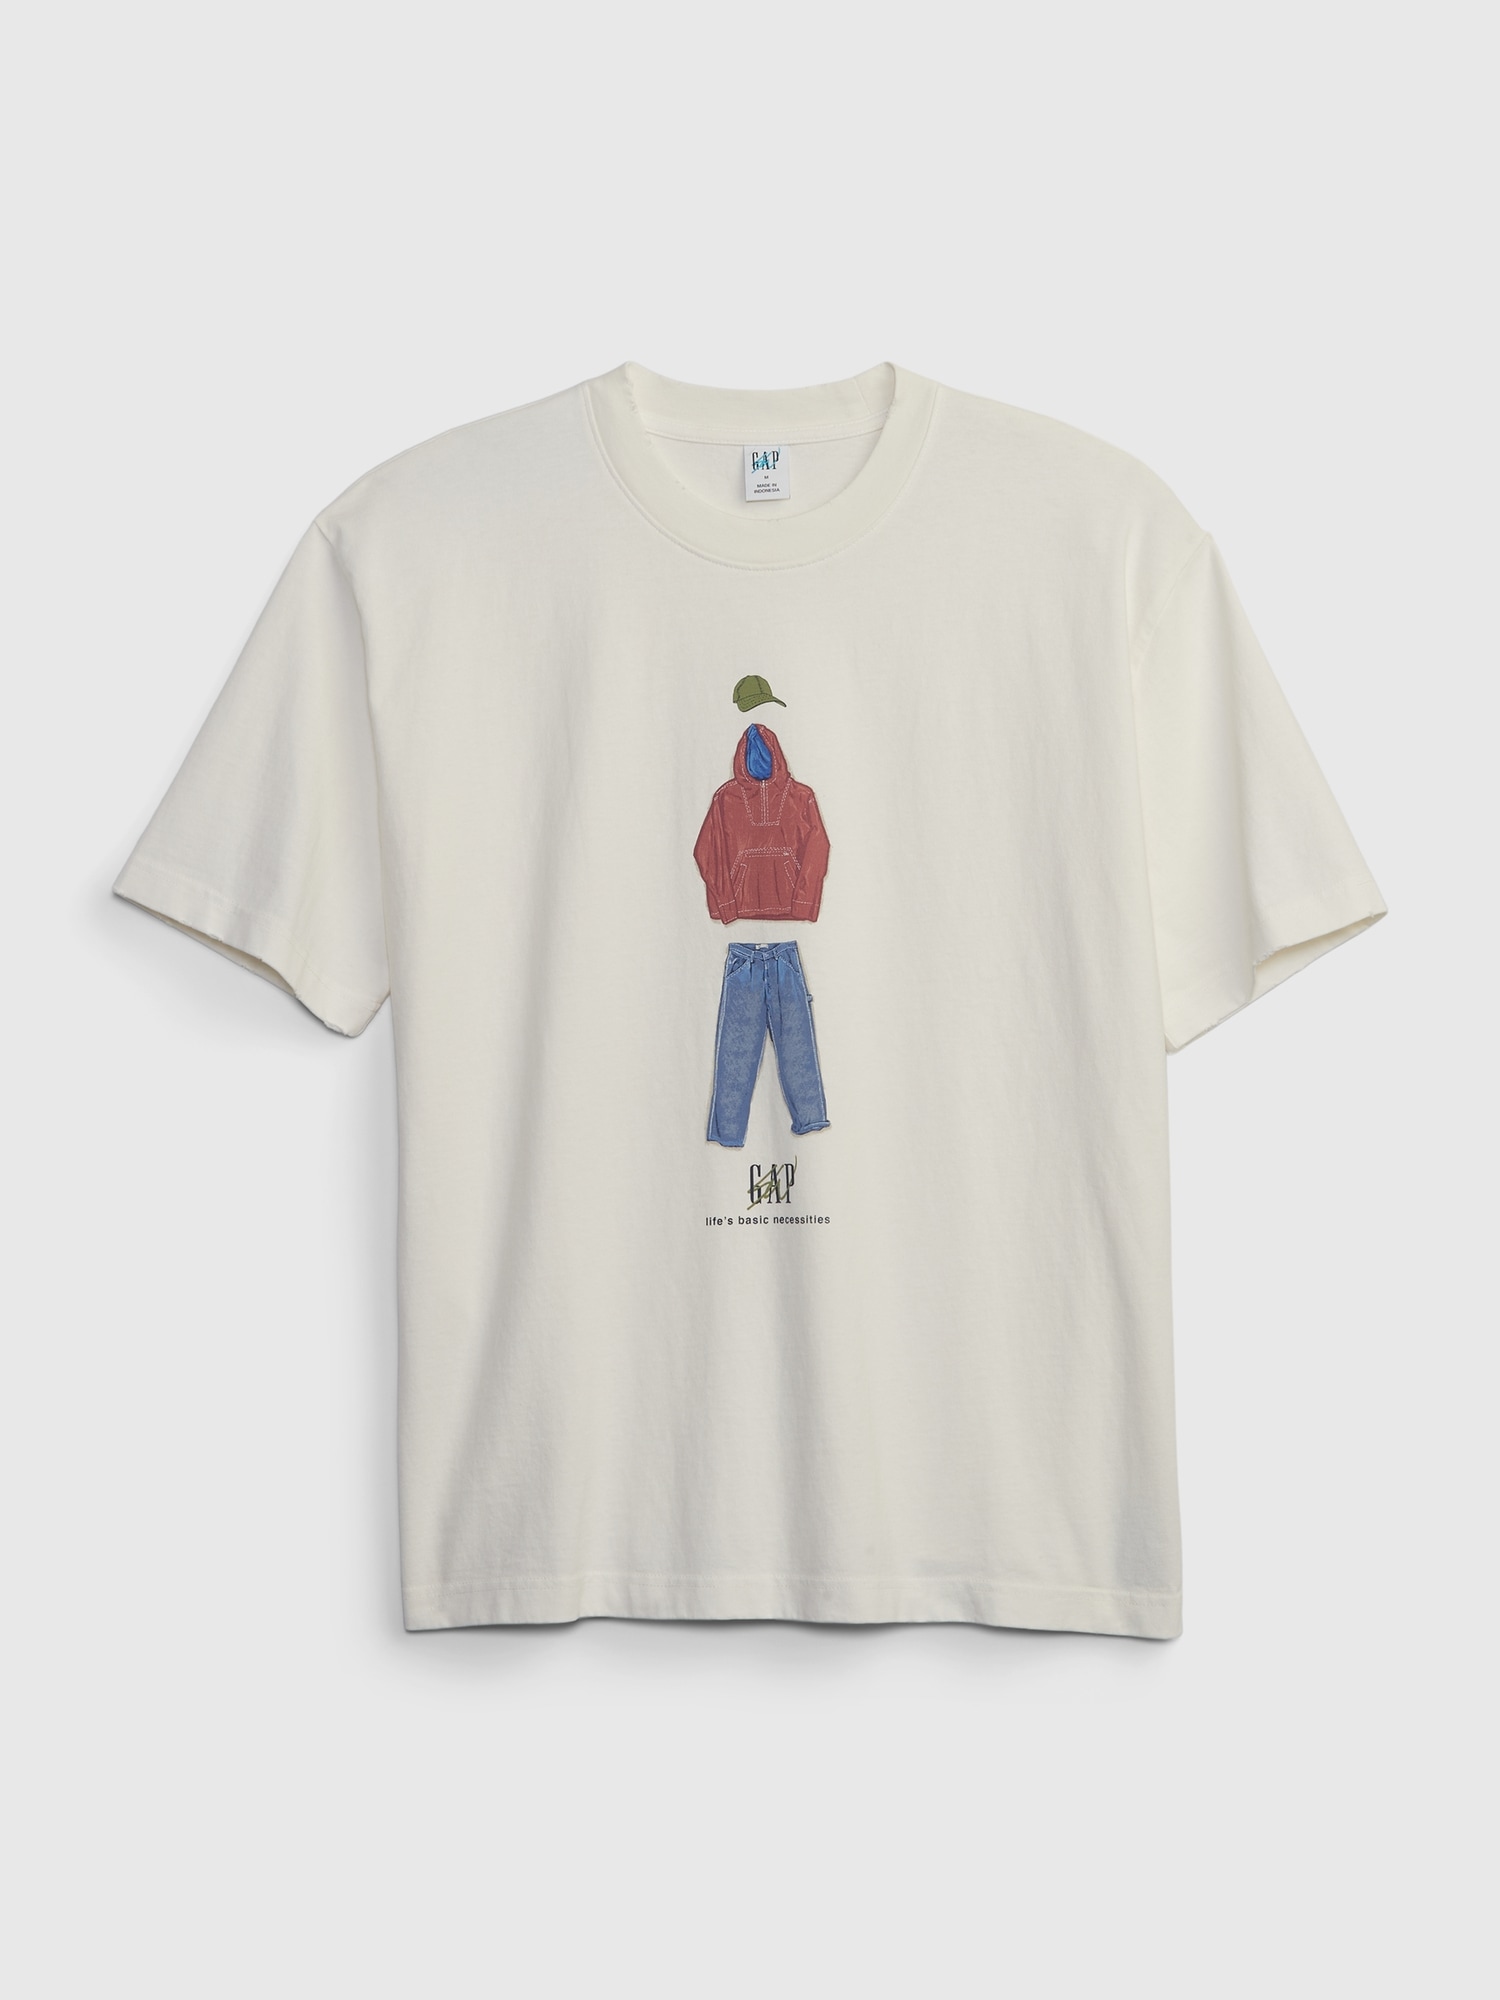 Gap Re-Issue × Sean Wotherspoon Graphic T-Shirt | Gap